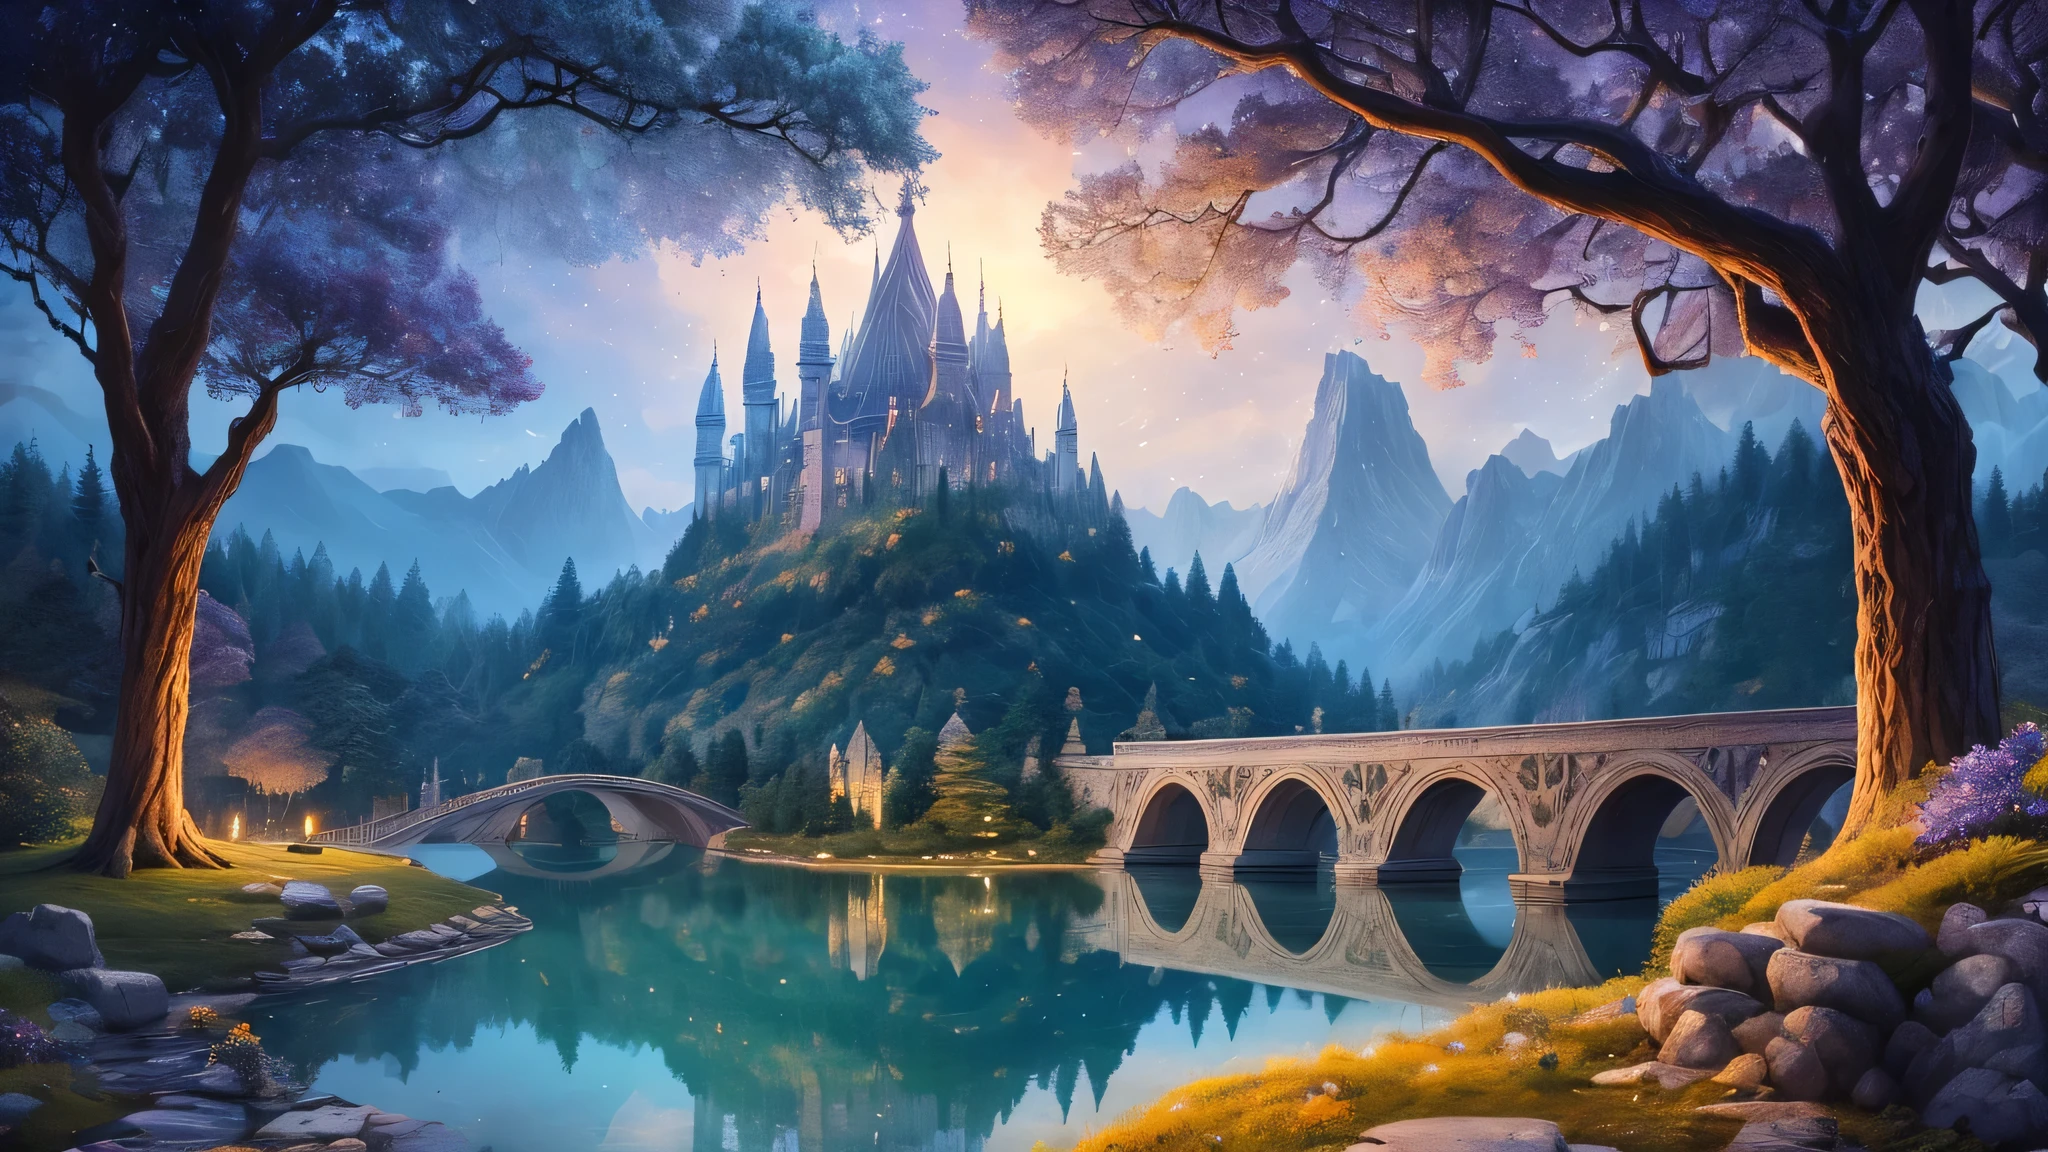 Create a breathtaking fantasy landscape set in the mythical land of Eldoria. The scene is an ethereal, moonlit night with a sky painted in hues of deep indigo and shimmering silver. The crescent moon hangs low, casting a gentle glow over the landscape.

In the foreground, depict a tranquil, crystal-clear lake whose surface mirrors the celestial wonders above. Surrounding the lake, ancient, towering willow trees with bioluminescent leaves sway gently in the breeze. Their branches, adorned with glowing blue and purple flowers, cascade gracefully towards the water, creating a mystical canopy.

To the left, an elegant, arching stone bridge made of translucent, enchanted crystals spans the lake. This bridge glows softly from within, as if infused with magical energy. On the bridge, a lone, robed figure stands, holding a staff that emits a soft, pulsating light, illuminating the path ahead.

Beyond the bridge, rolling hills covered in lush, emerald grass lead up to majestic, snow-capped mountains that pierce the sky. These mountains are not ordinary; their peaks sparkle with embedded gemstones of various colors, and gentle waterfalls cascade down their sides, glistening in the moonlight.

In the distance, nestled at the base of the mountains, lies a grand, ancient city with towering spires and domes that glow with an inner light. The architecture is a blend of elven grace and dwarven solidity, with intricate carvings and floating lanterns that add to the city’s enchanting ambiance.

Above the city, mythical creatures such as dragons and phoenixes soar gracefully, leaving trails of sparkling stardust in their wake. Among the clouds, faint constellations form mythical shapes, as if the heavens themselves are telling a story.

To the right, a dense, enchanted forest with trees that have silver bark and golden leaves stretches towards the horizon. Within the forest, the soft glow of fairy lights can be seen, hinting at hidden, magical creatures and secret, mystical groves.